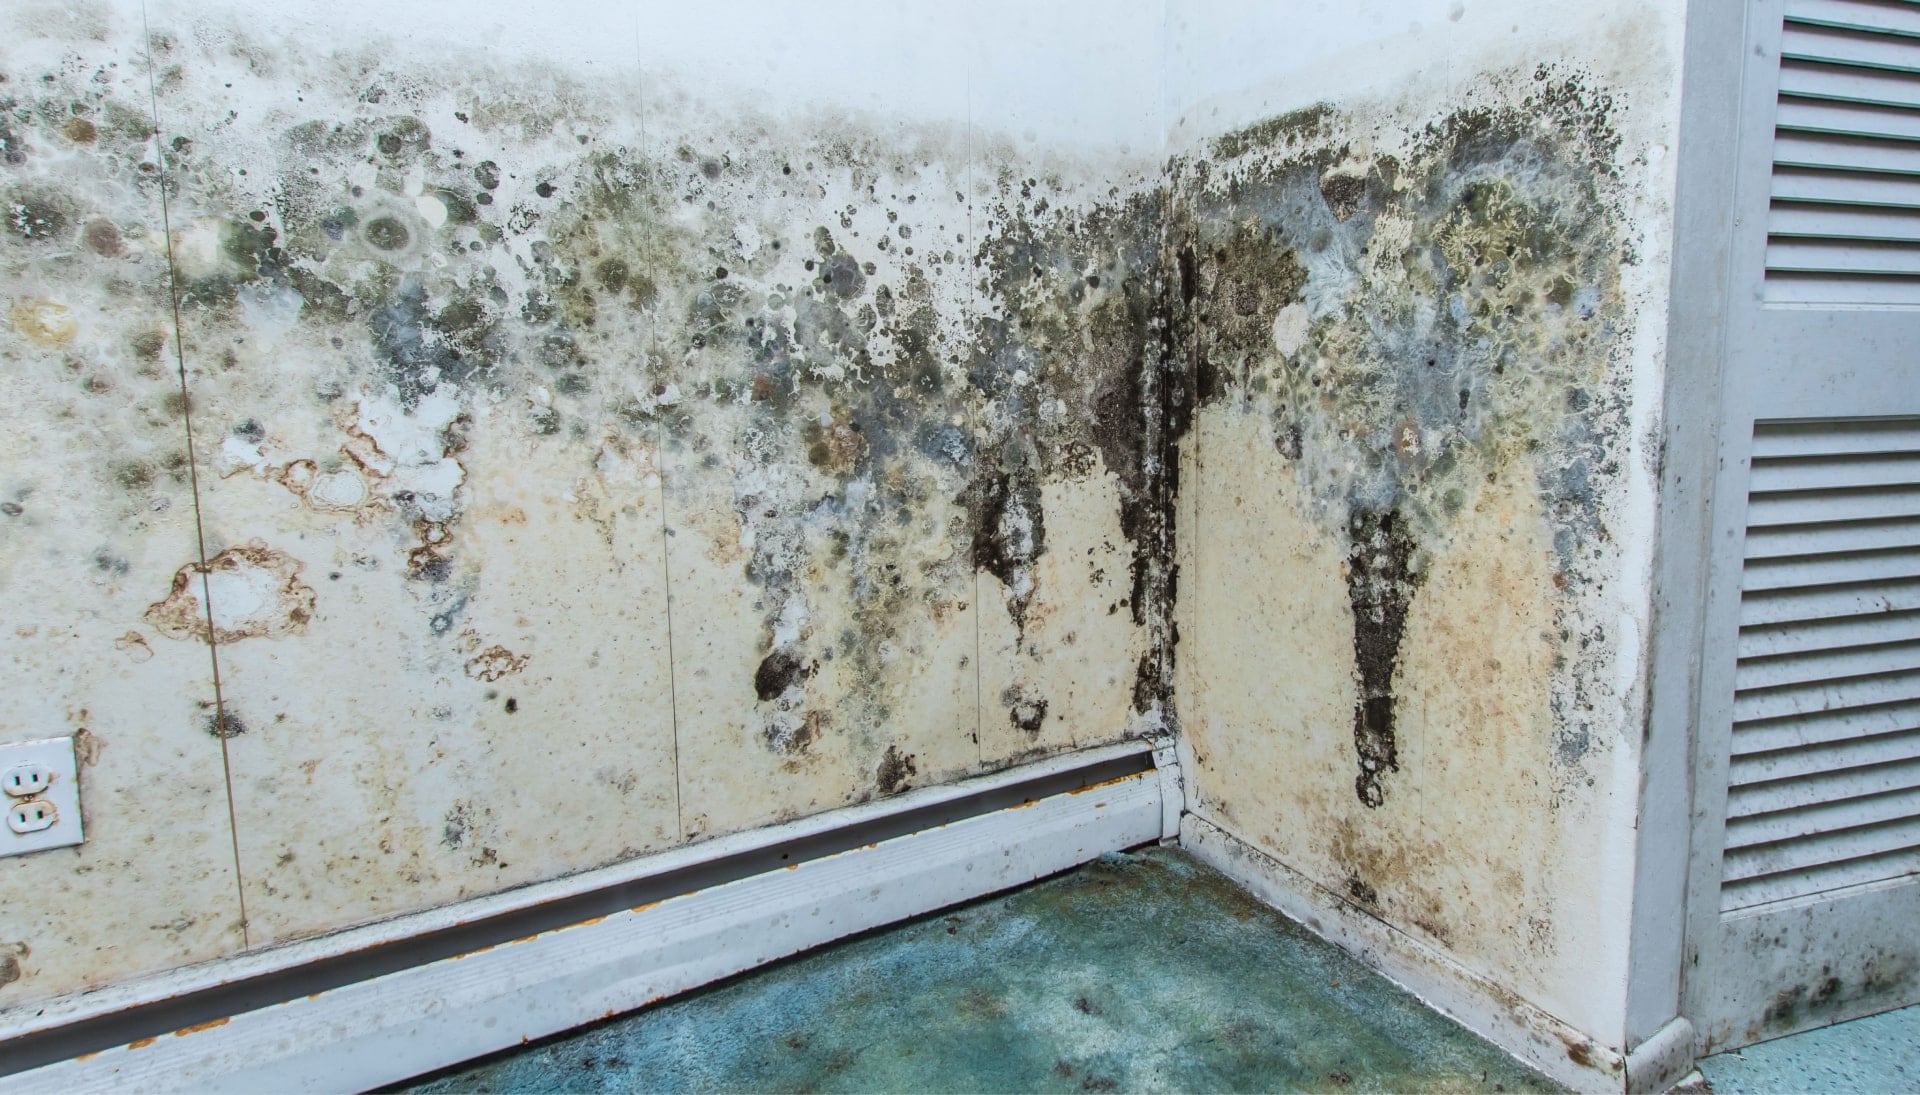 Professional mold removal, odor control, and water damage restoration service in Bowie, Maryland.